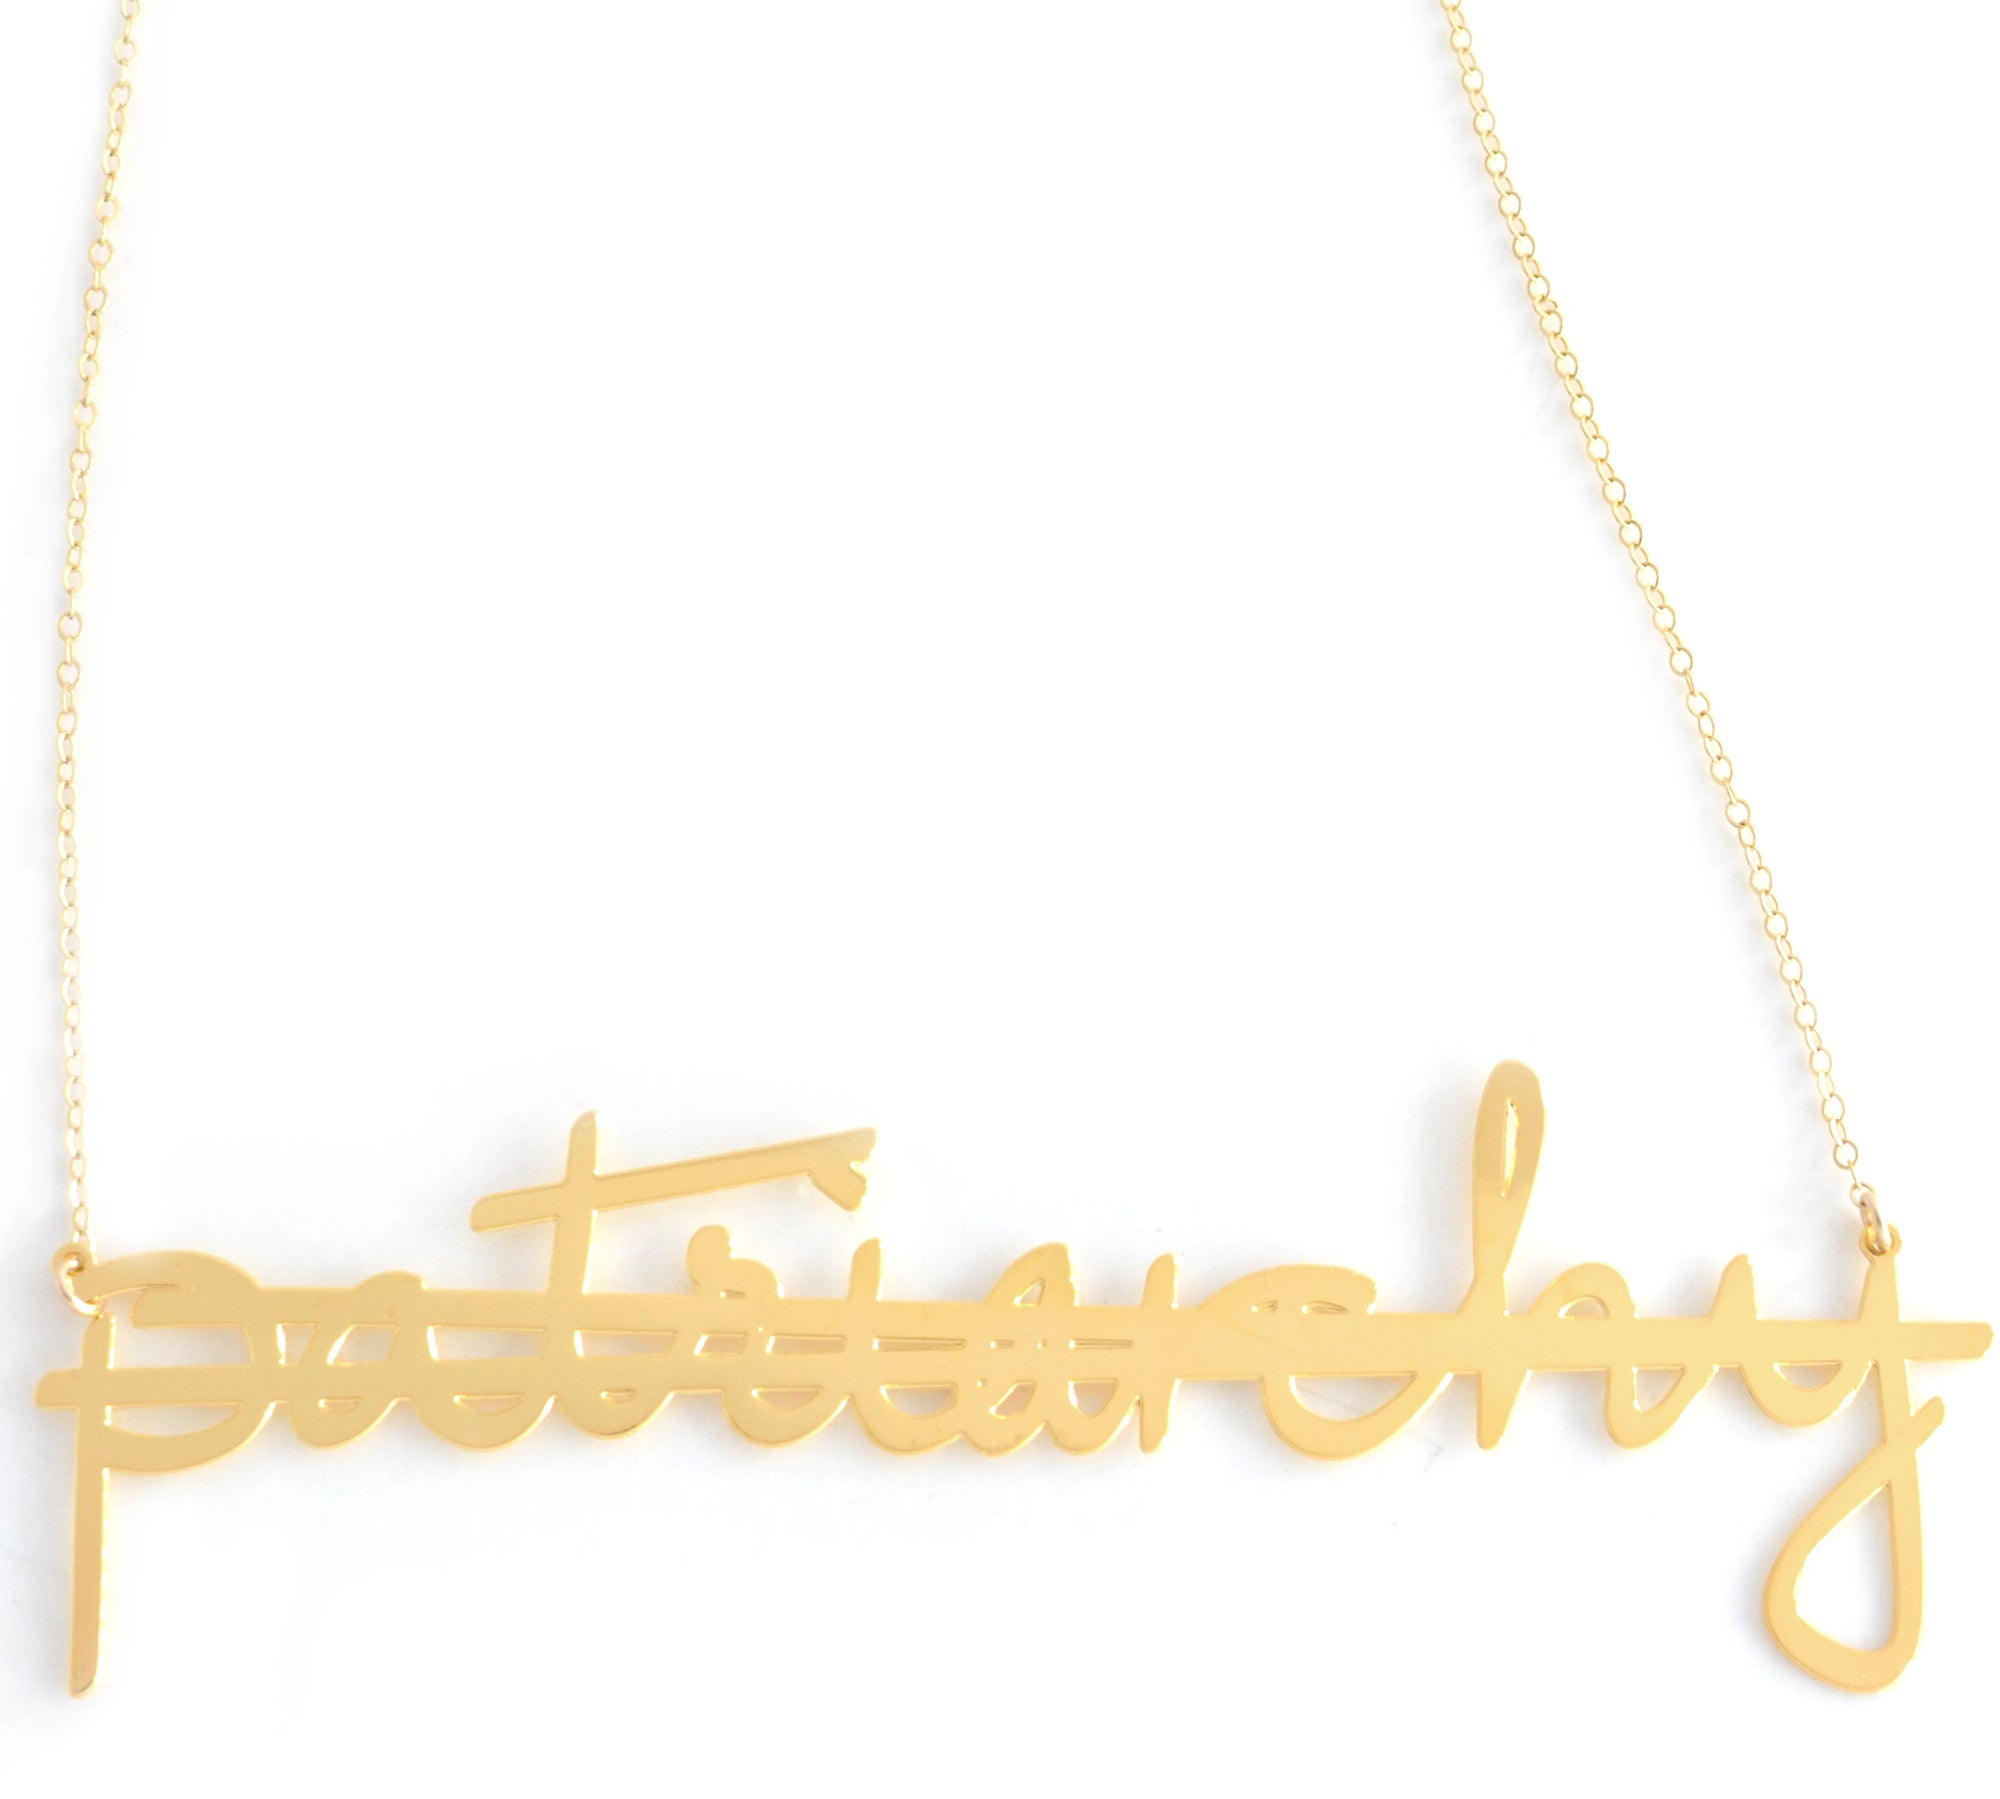 No More Patriarchy Necklace - High Quality, Affordable, Hand Written, Empowering, Self Love, Mantra Word Necklace - Available in Gold and Silver - Small and Large Sizes - Made in USA - Brevity Jewelry